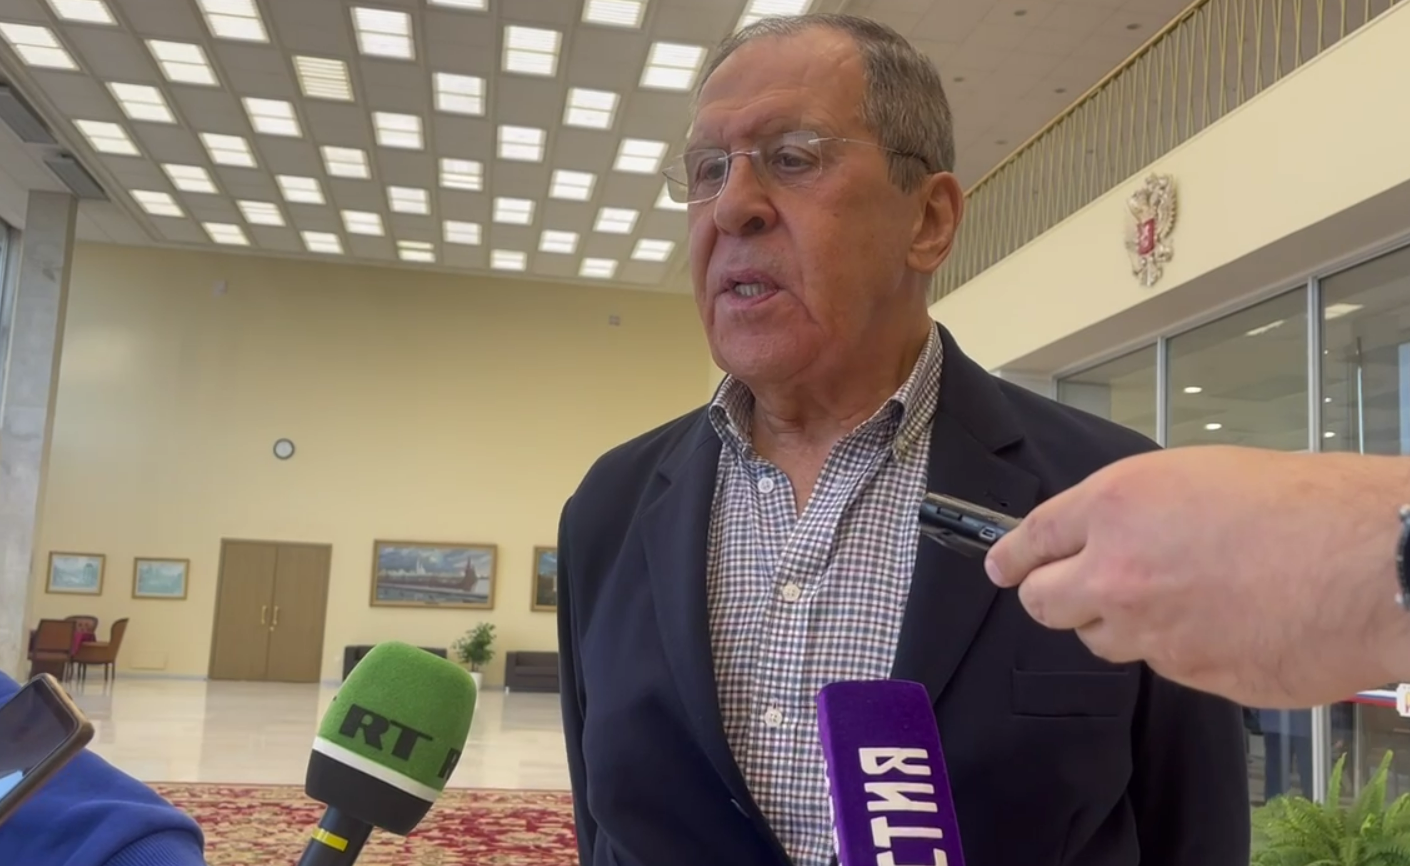 Lavrov makes a ridiculous proposal, offering to create a new soccer team